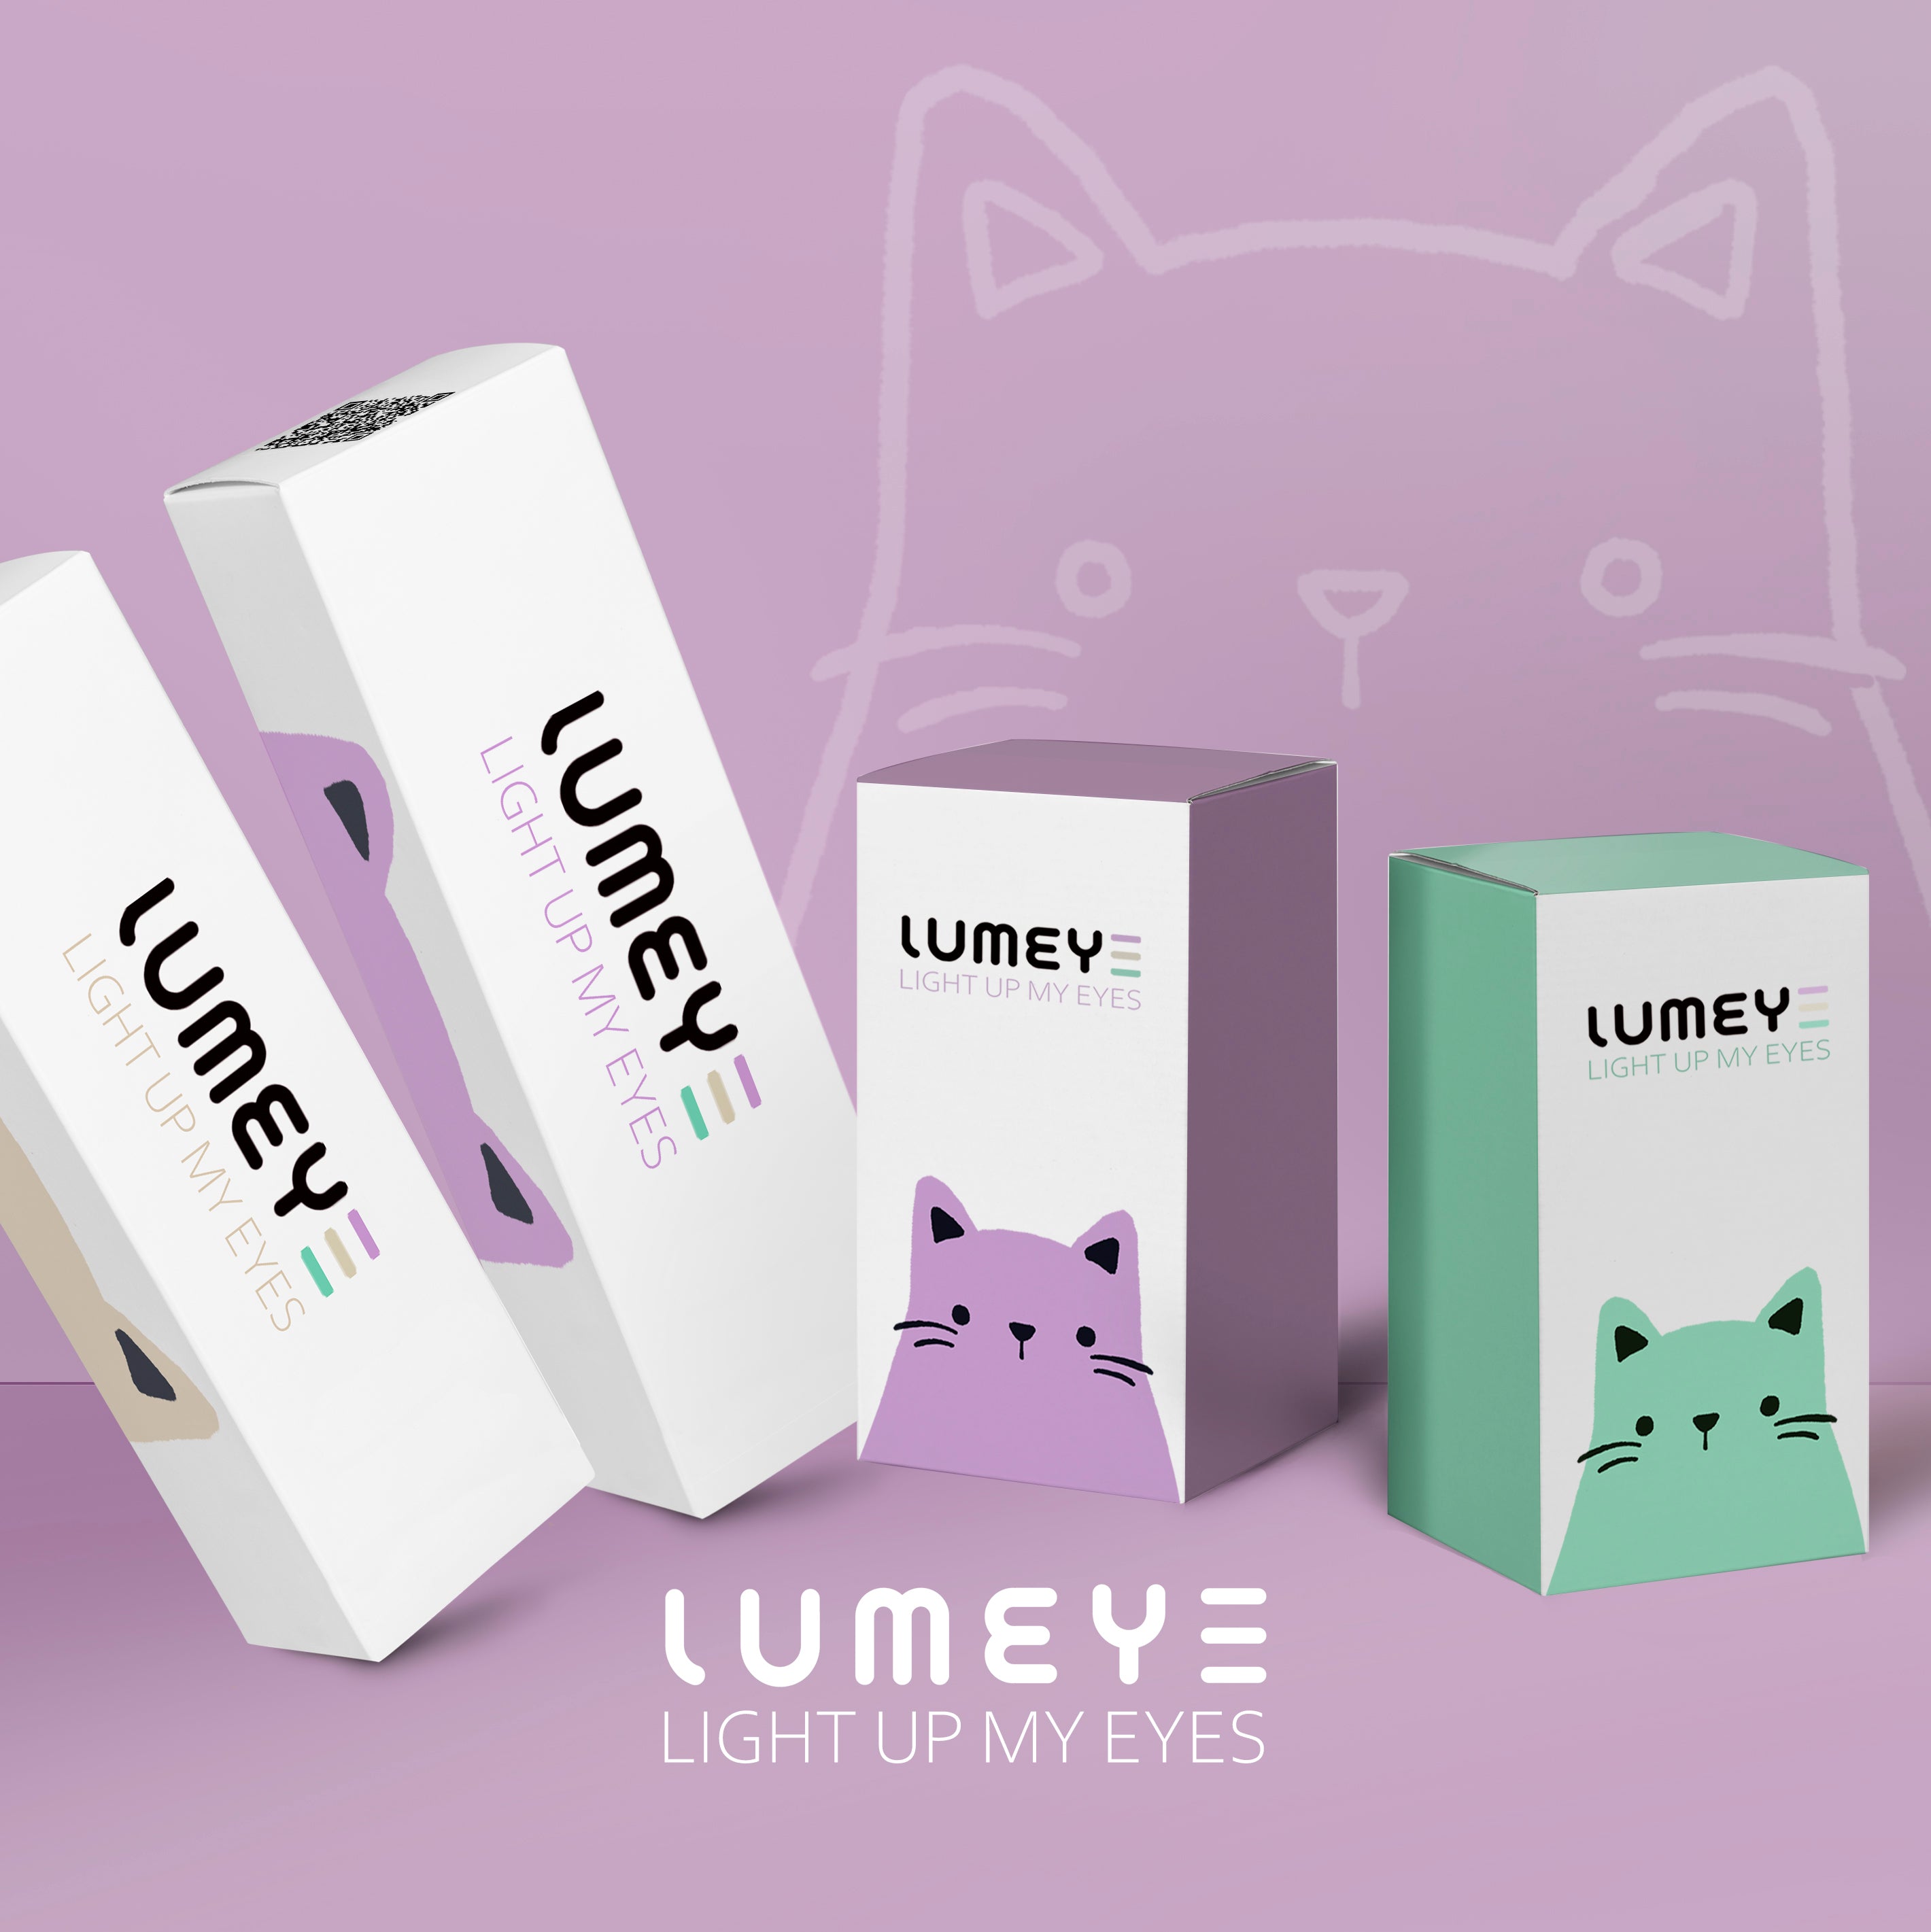 Best COLORED CONTACTS - LUMEYE Strawberry Pink Colored Contact Lenses - LUMEYE